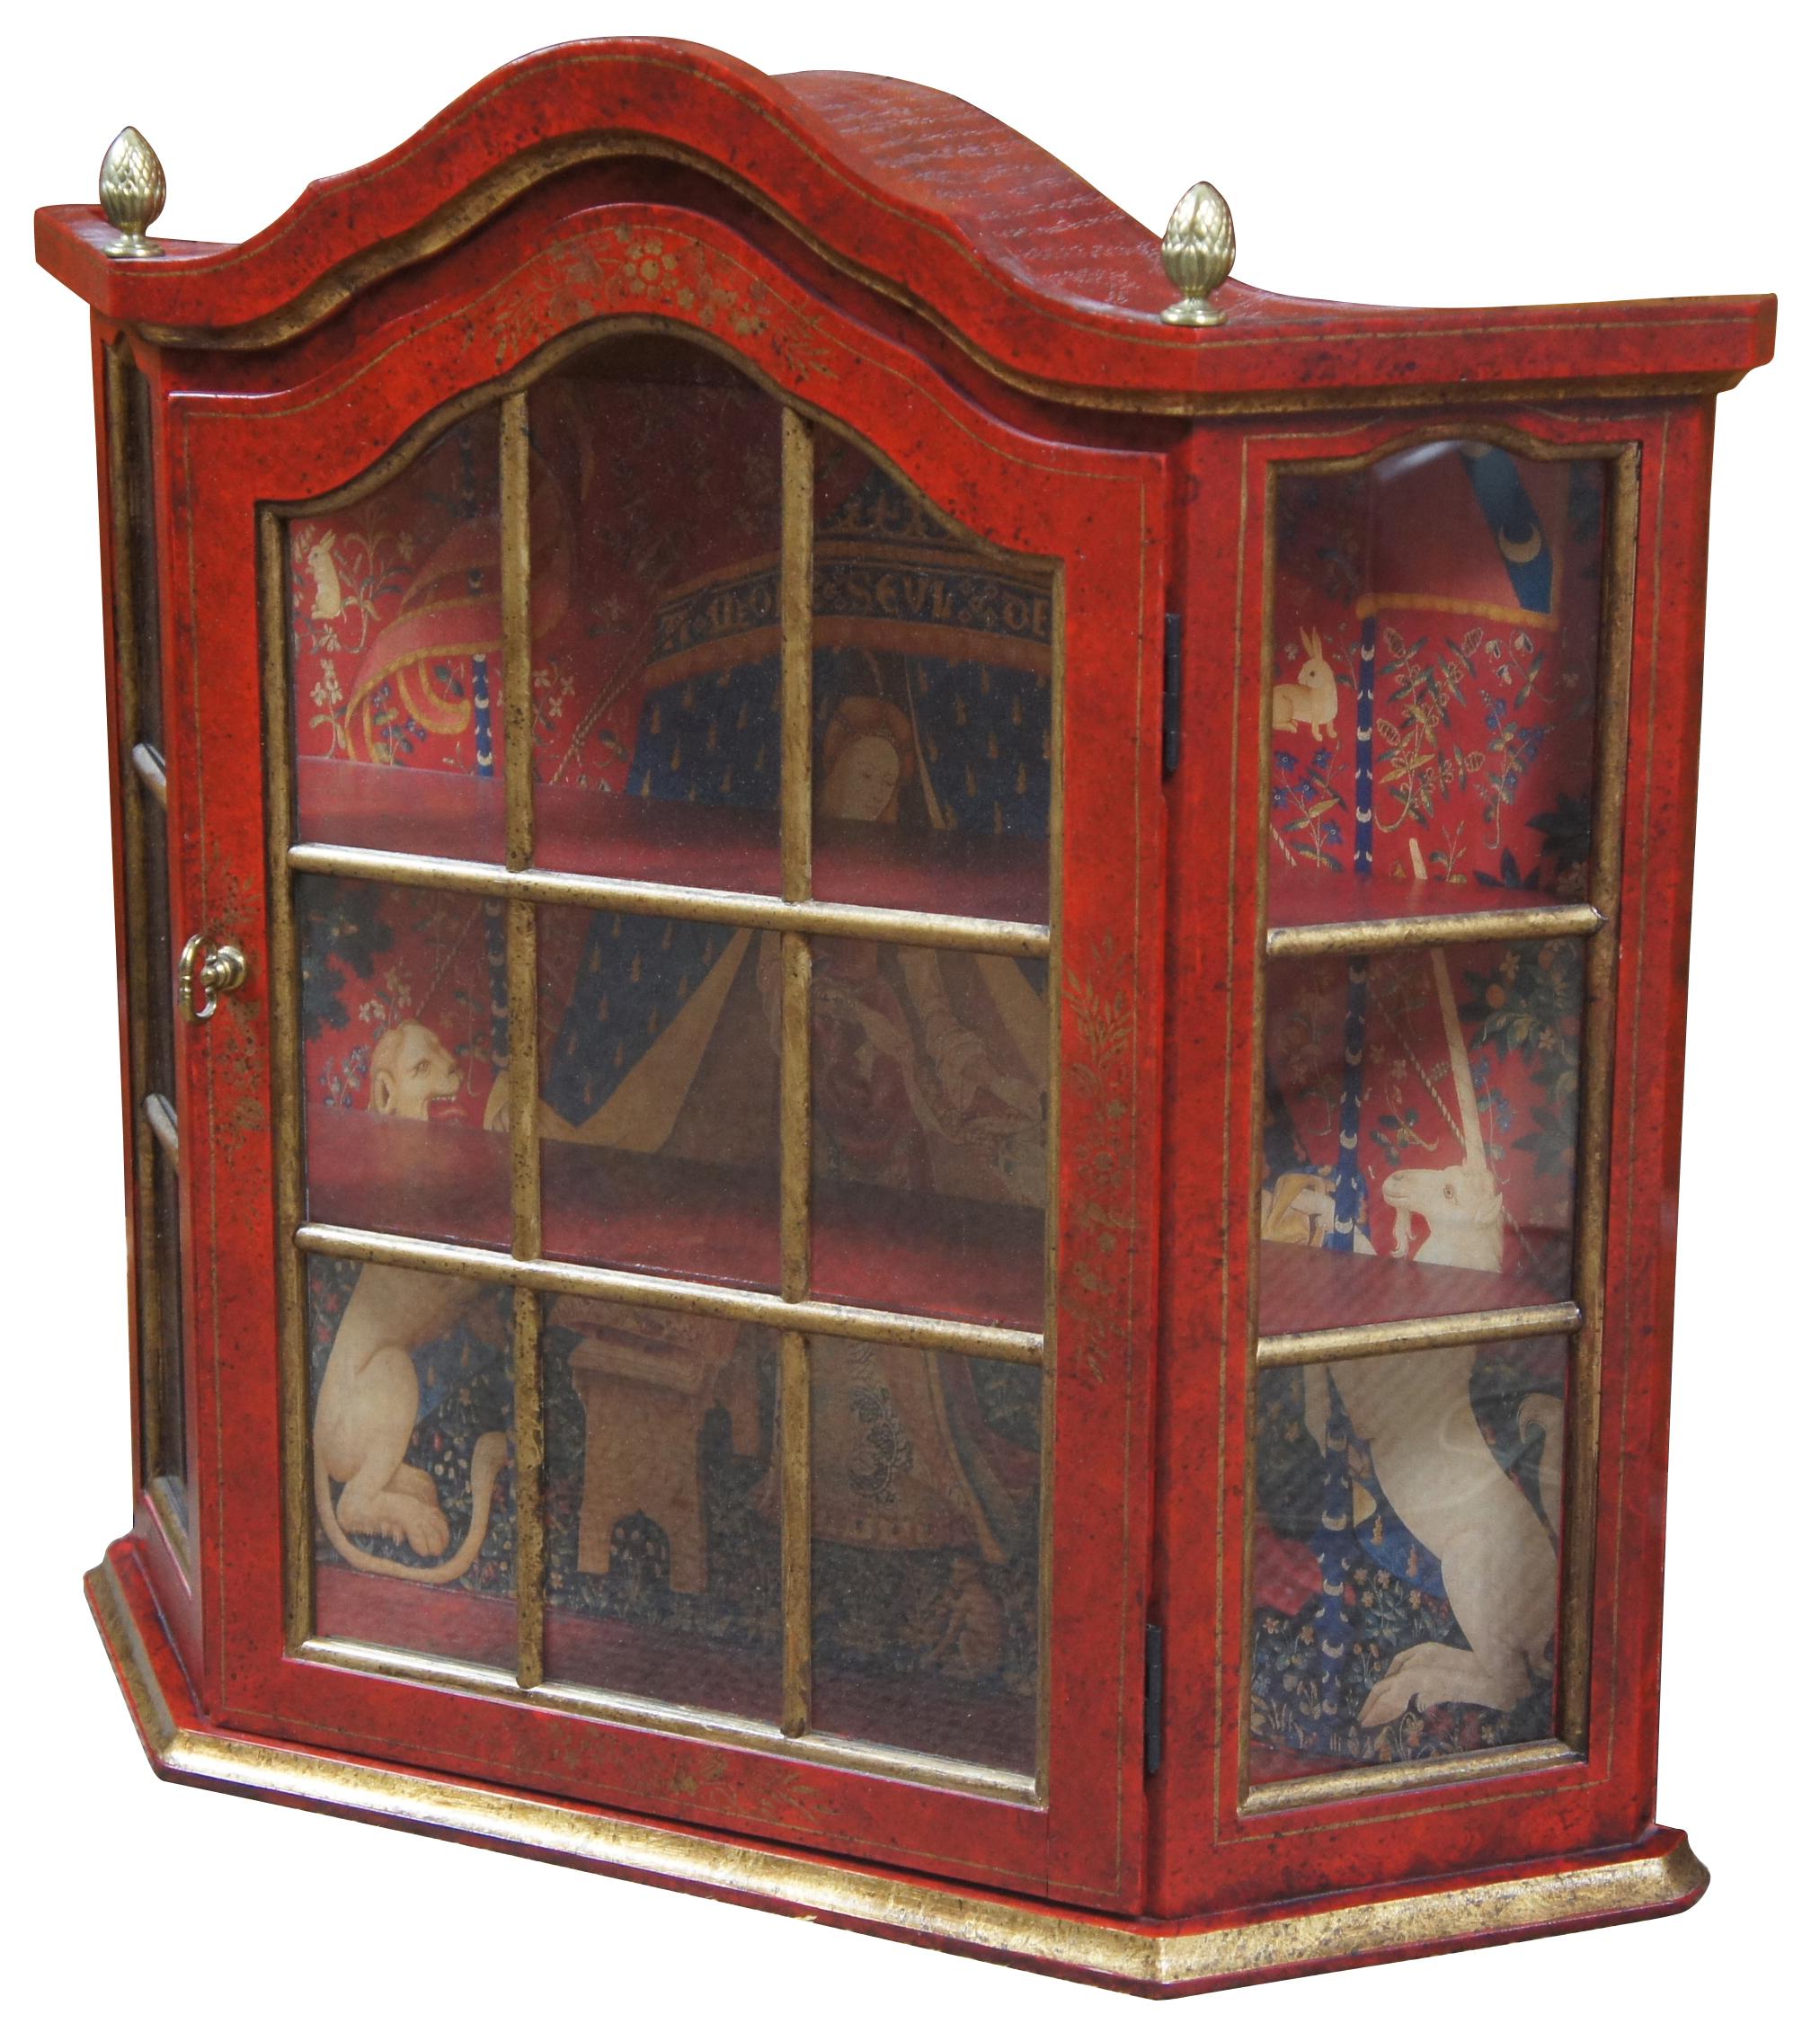 Vintage, circa 1970s. wall curio cabinet or display case. Features traditional styling with red and gold distressed paint, glass paneled door and acorn finials. Interior is lined with a Heraldic or Victorian scene. Measures: 22